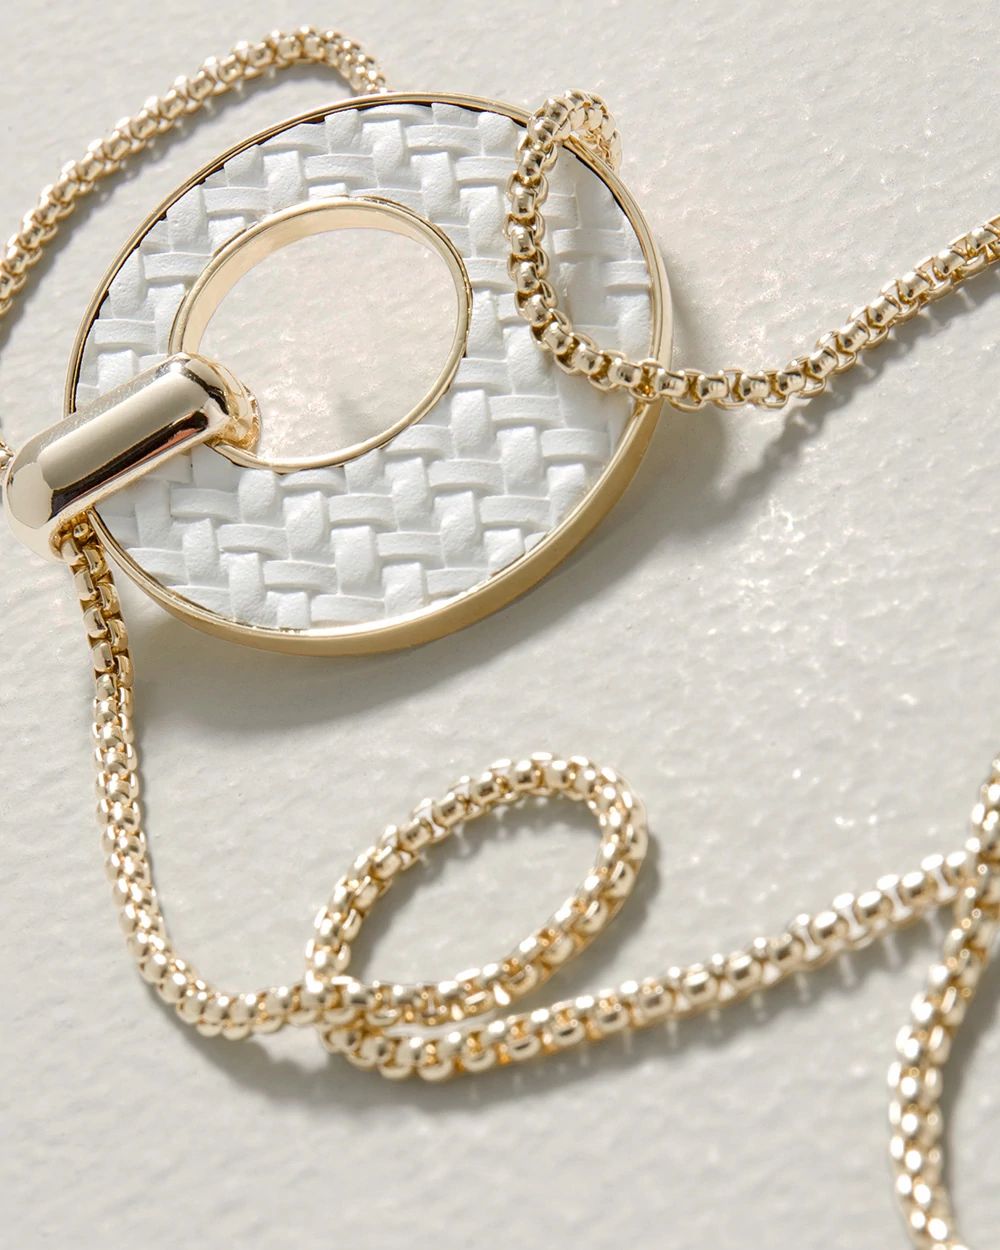 White & Goldtone Leather Pendant Necklace click to view larger image.